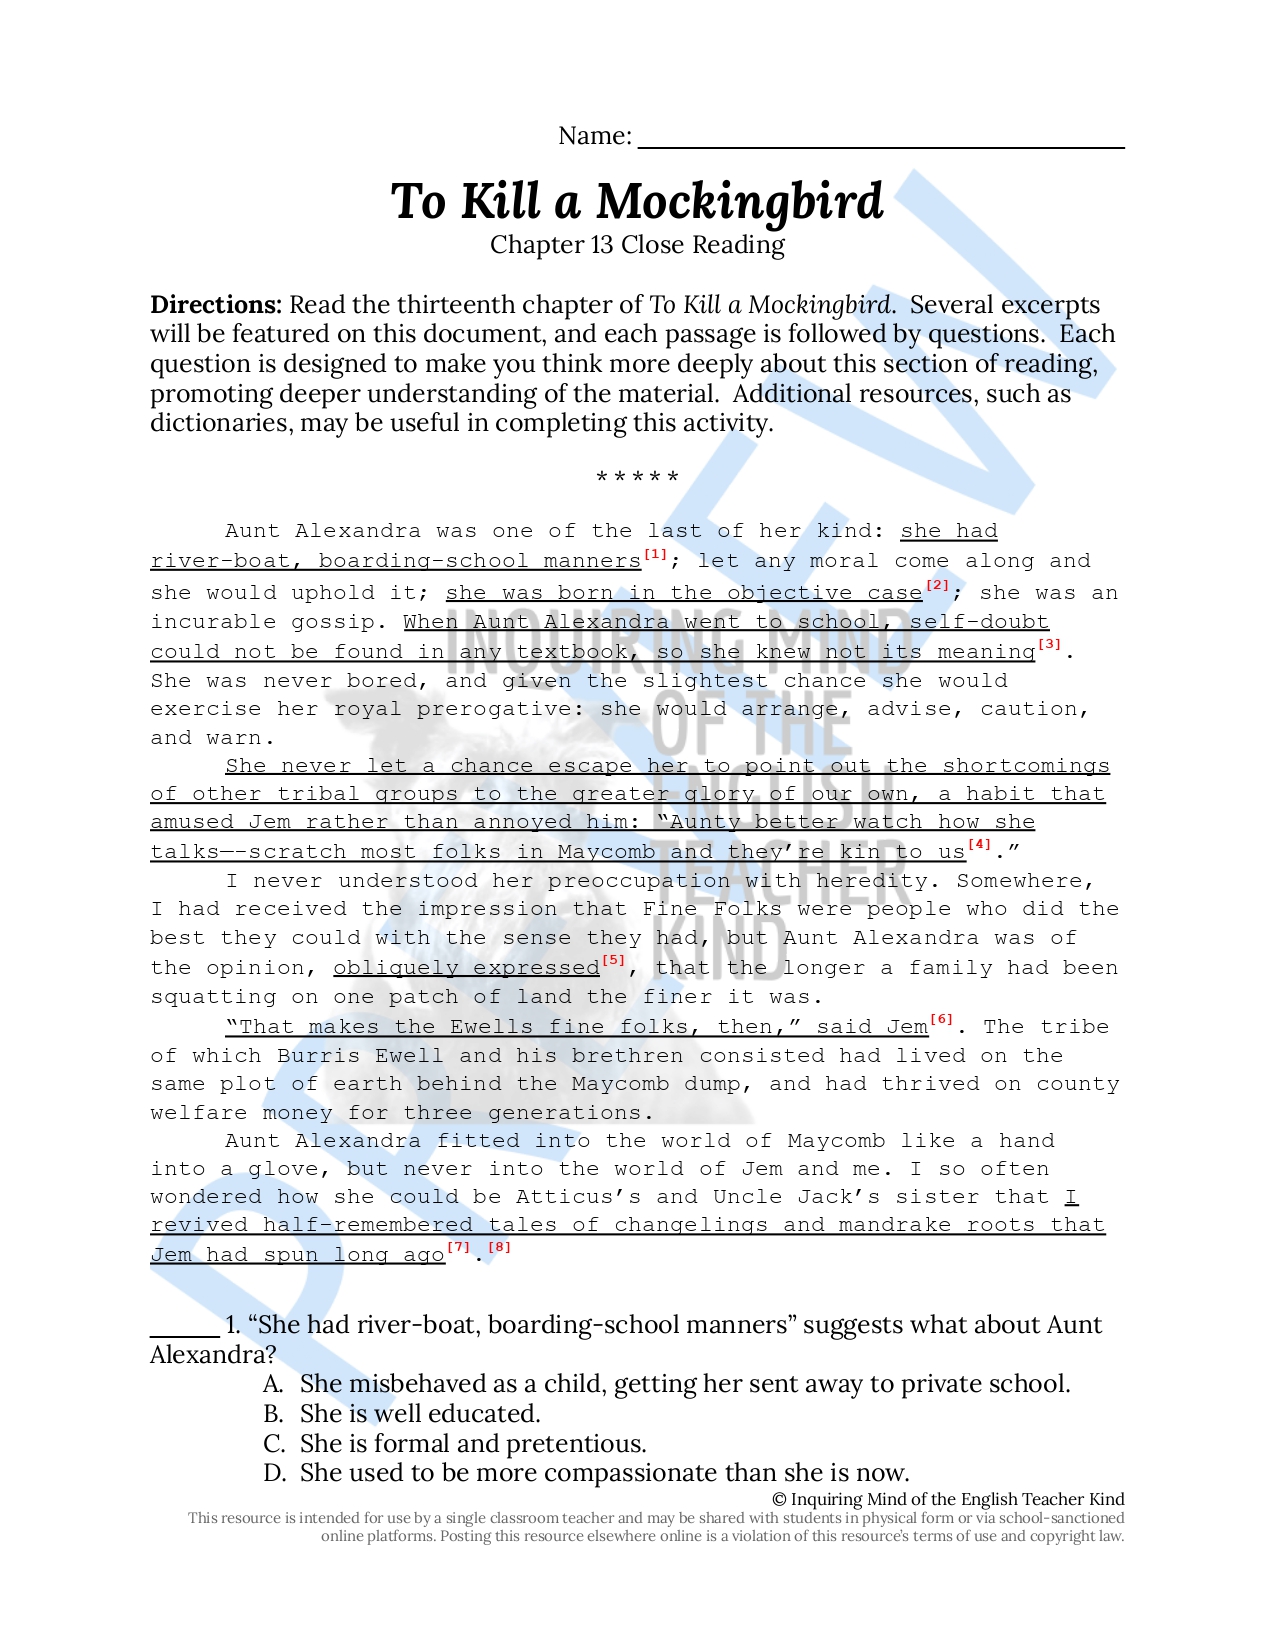 to kill a mockingbird chapter 13 questions